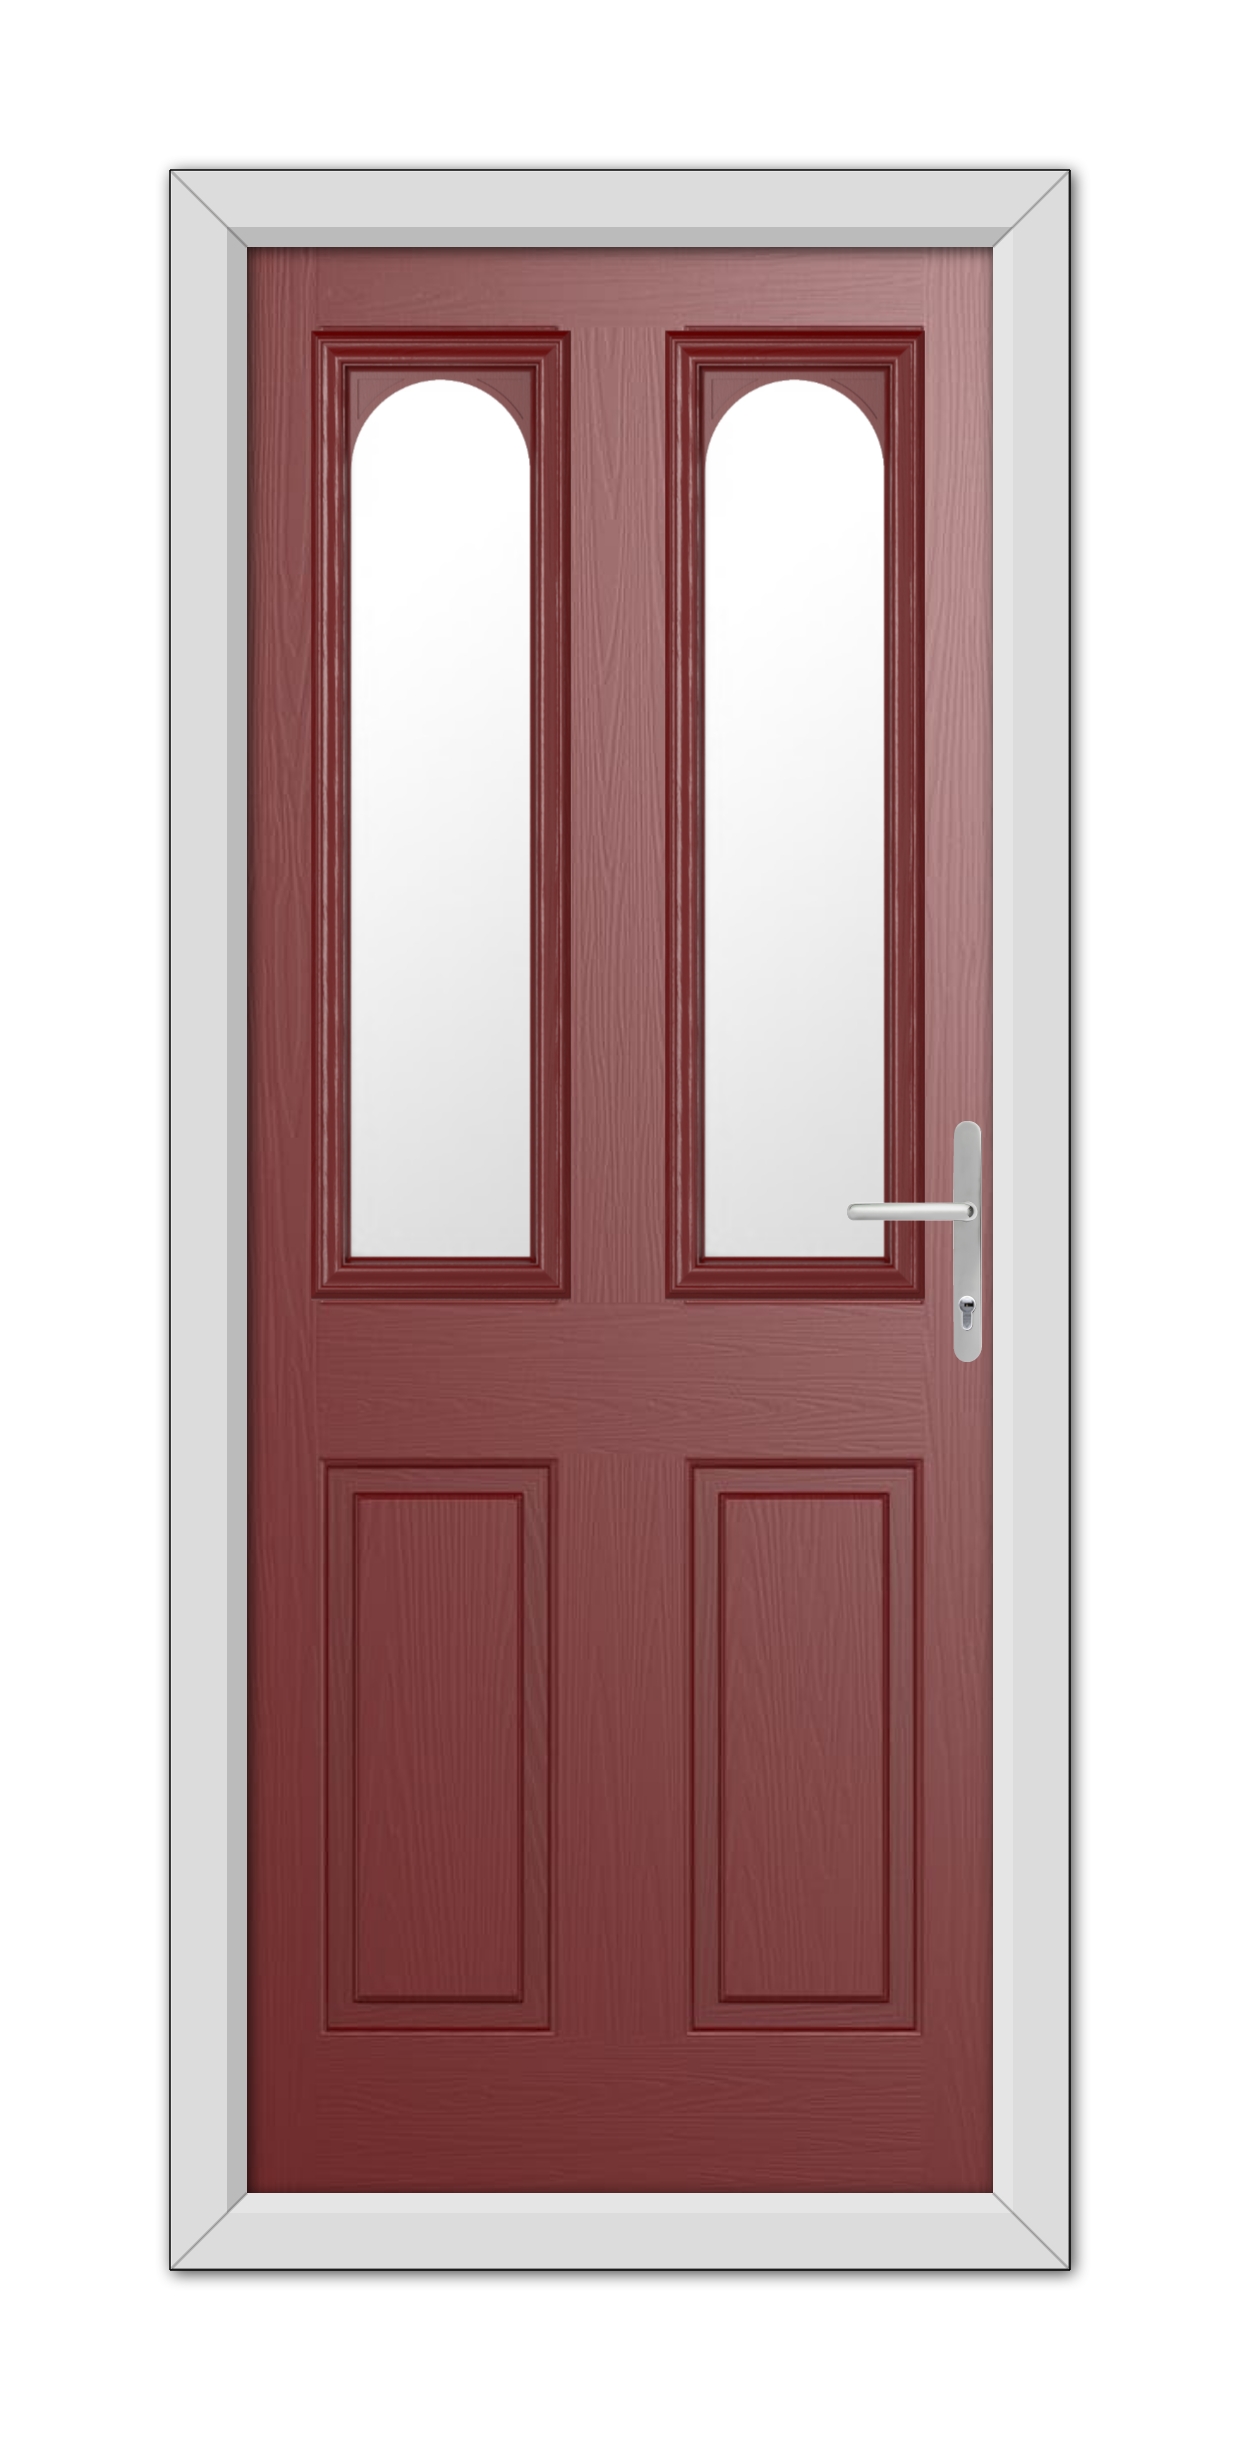 Red Elmhurst Composite Door 48mm Timber Core with white frames, featuring upper half glass windows and modern handles.